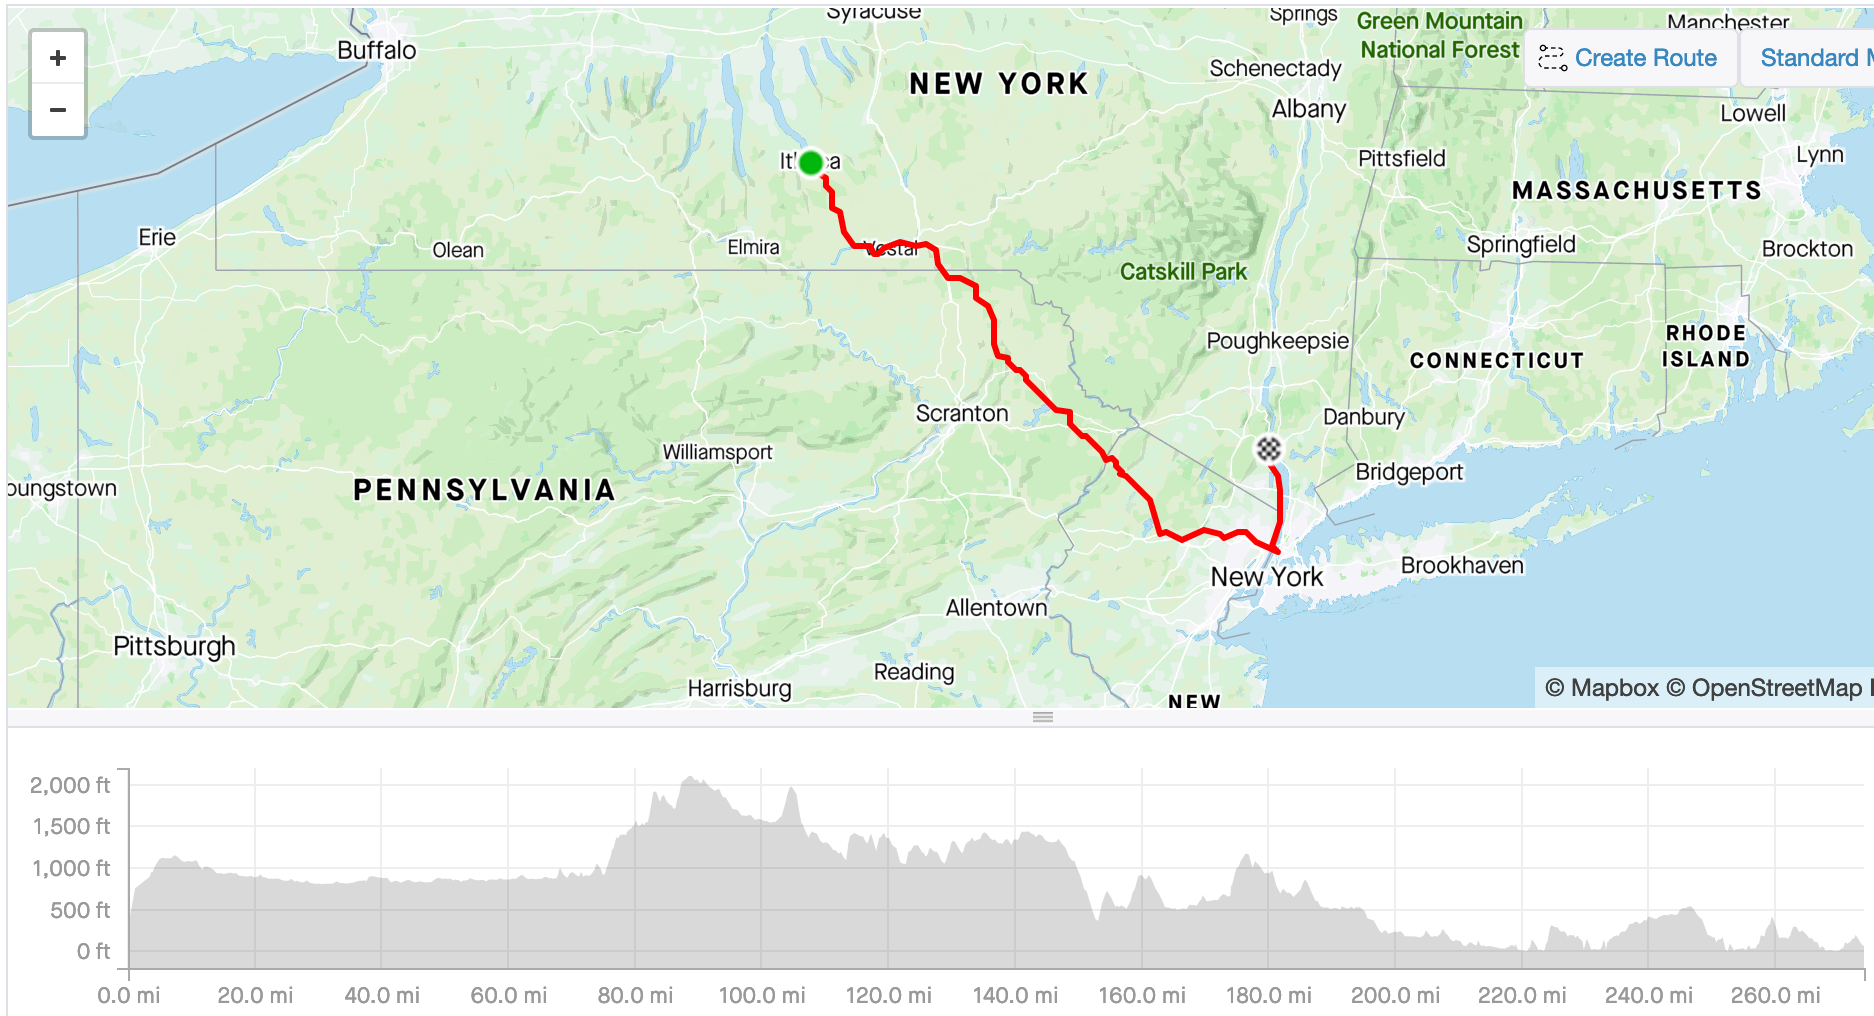 Trip from Ithaca, NY to NYC, and then to Bear Mountain. 274 miles. 14,890 ft of climbing.